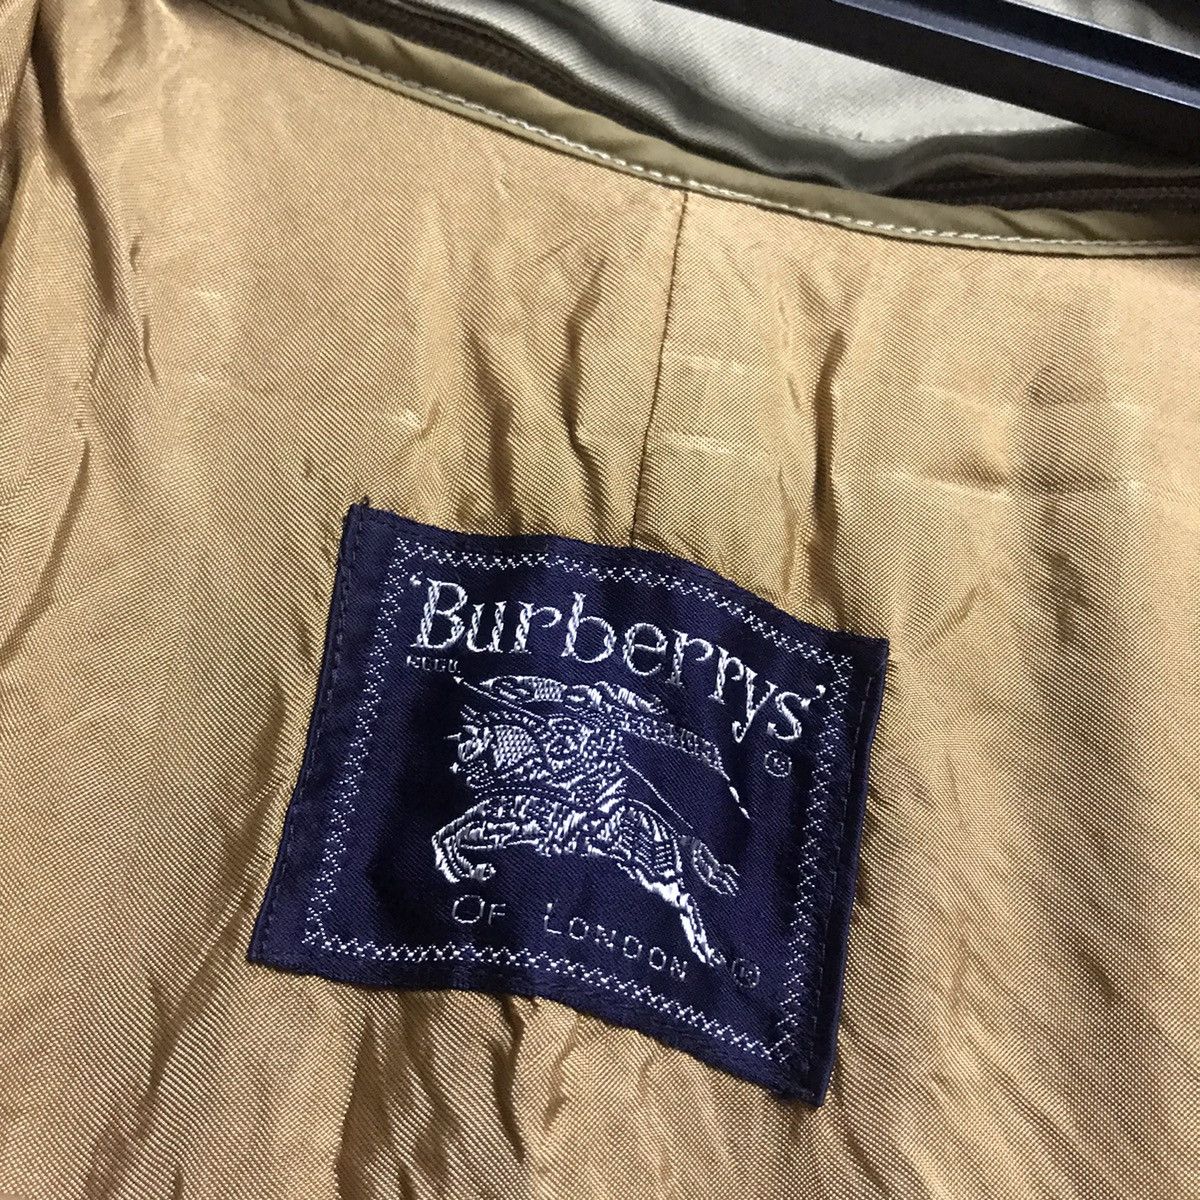 Burberry Prorsum Vintage burberry nova check trench coat with wool lining Size US L / EU 52-54 / 3 - 13 Thumbnail